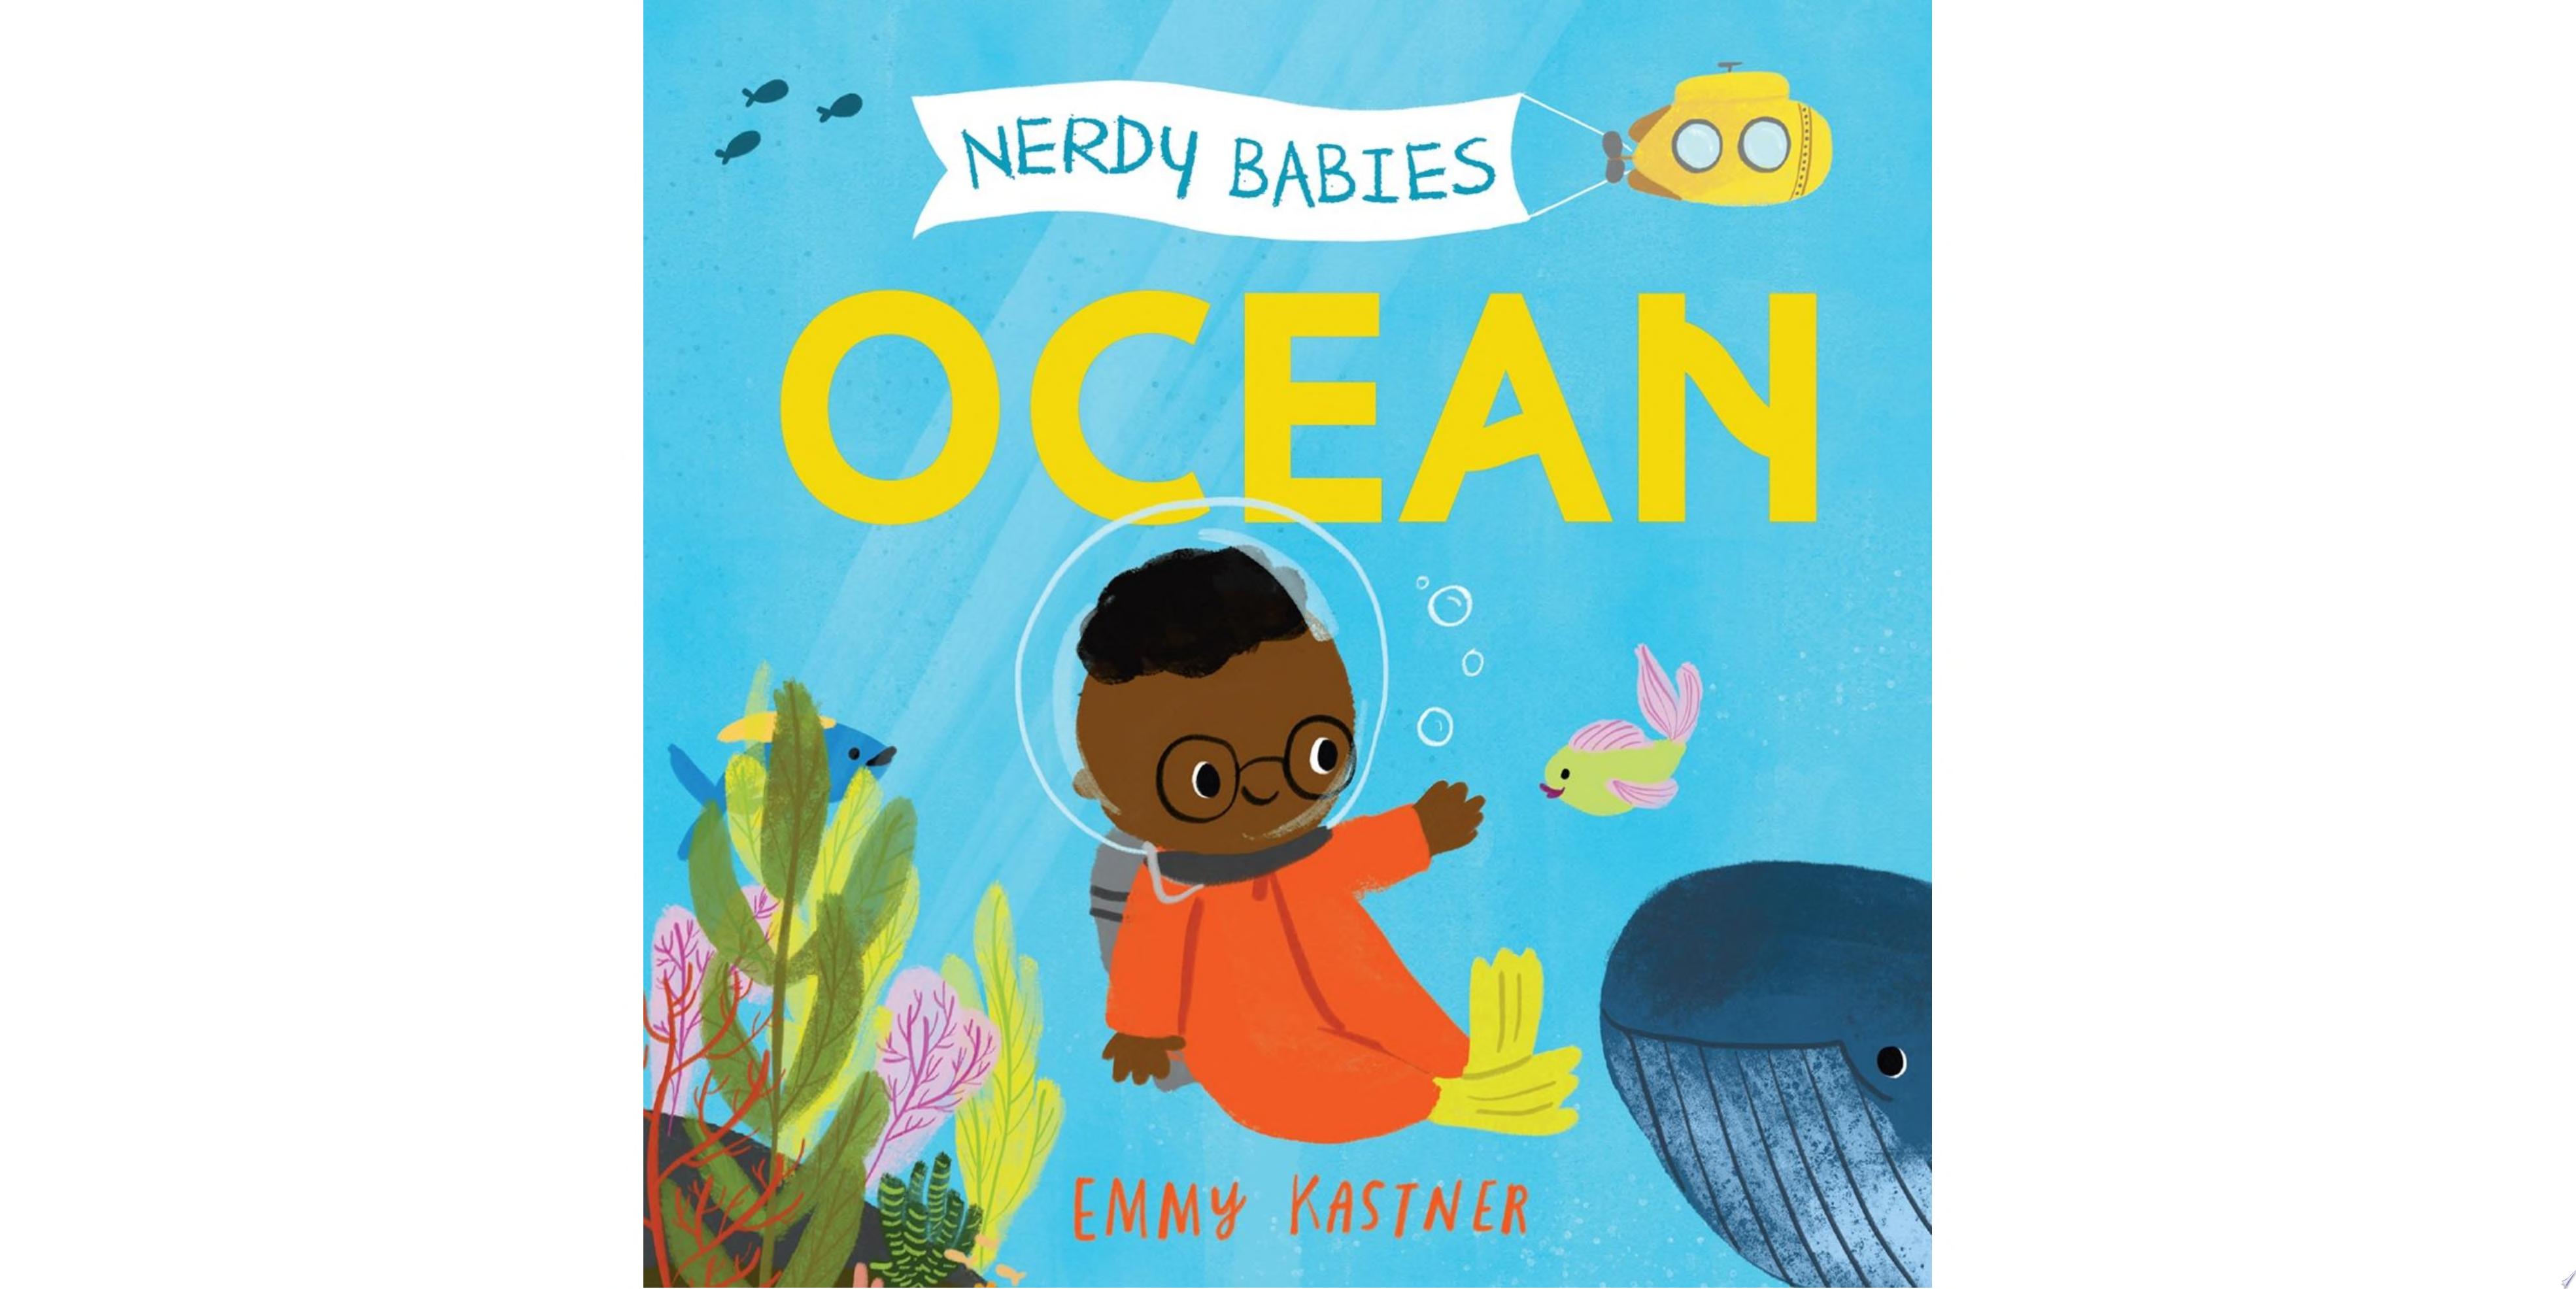 Image for "Nerdy Babies: Ocean"